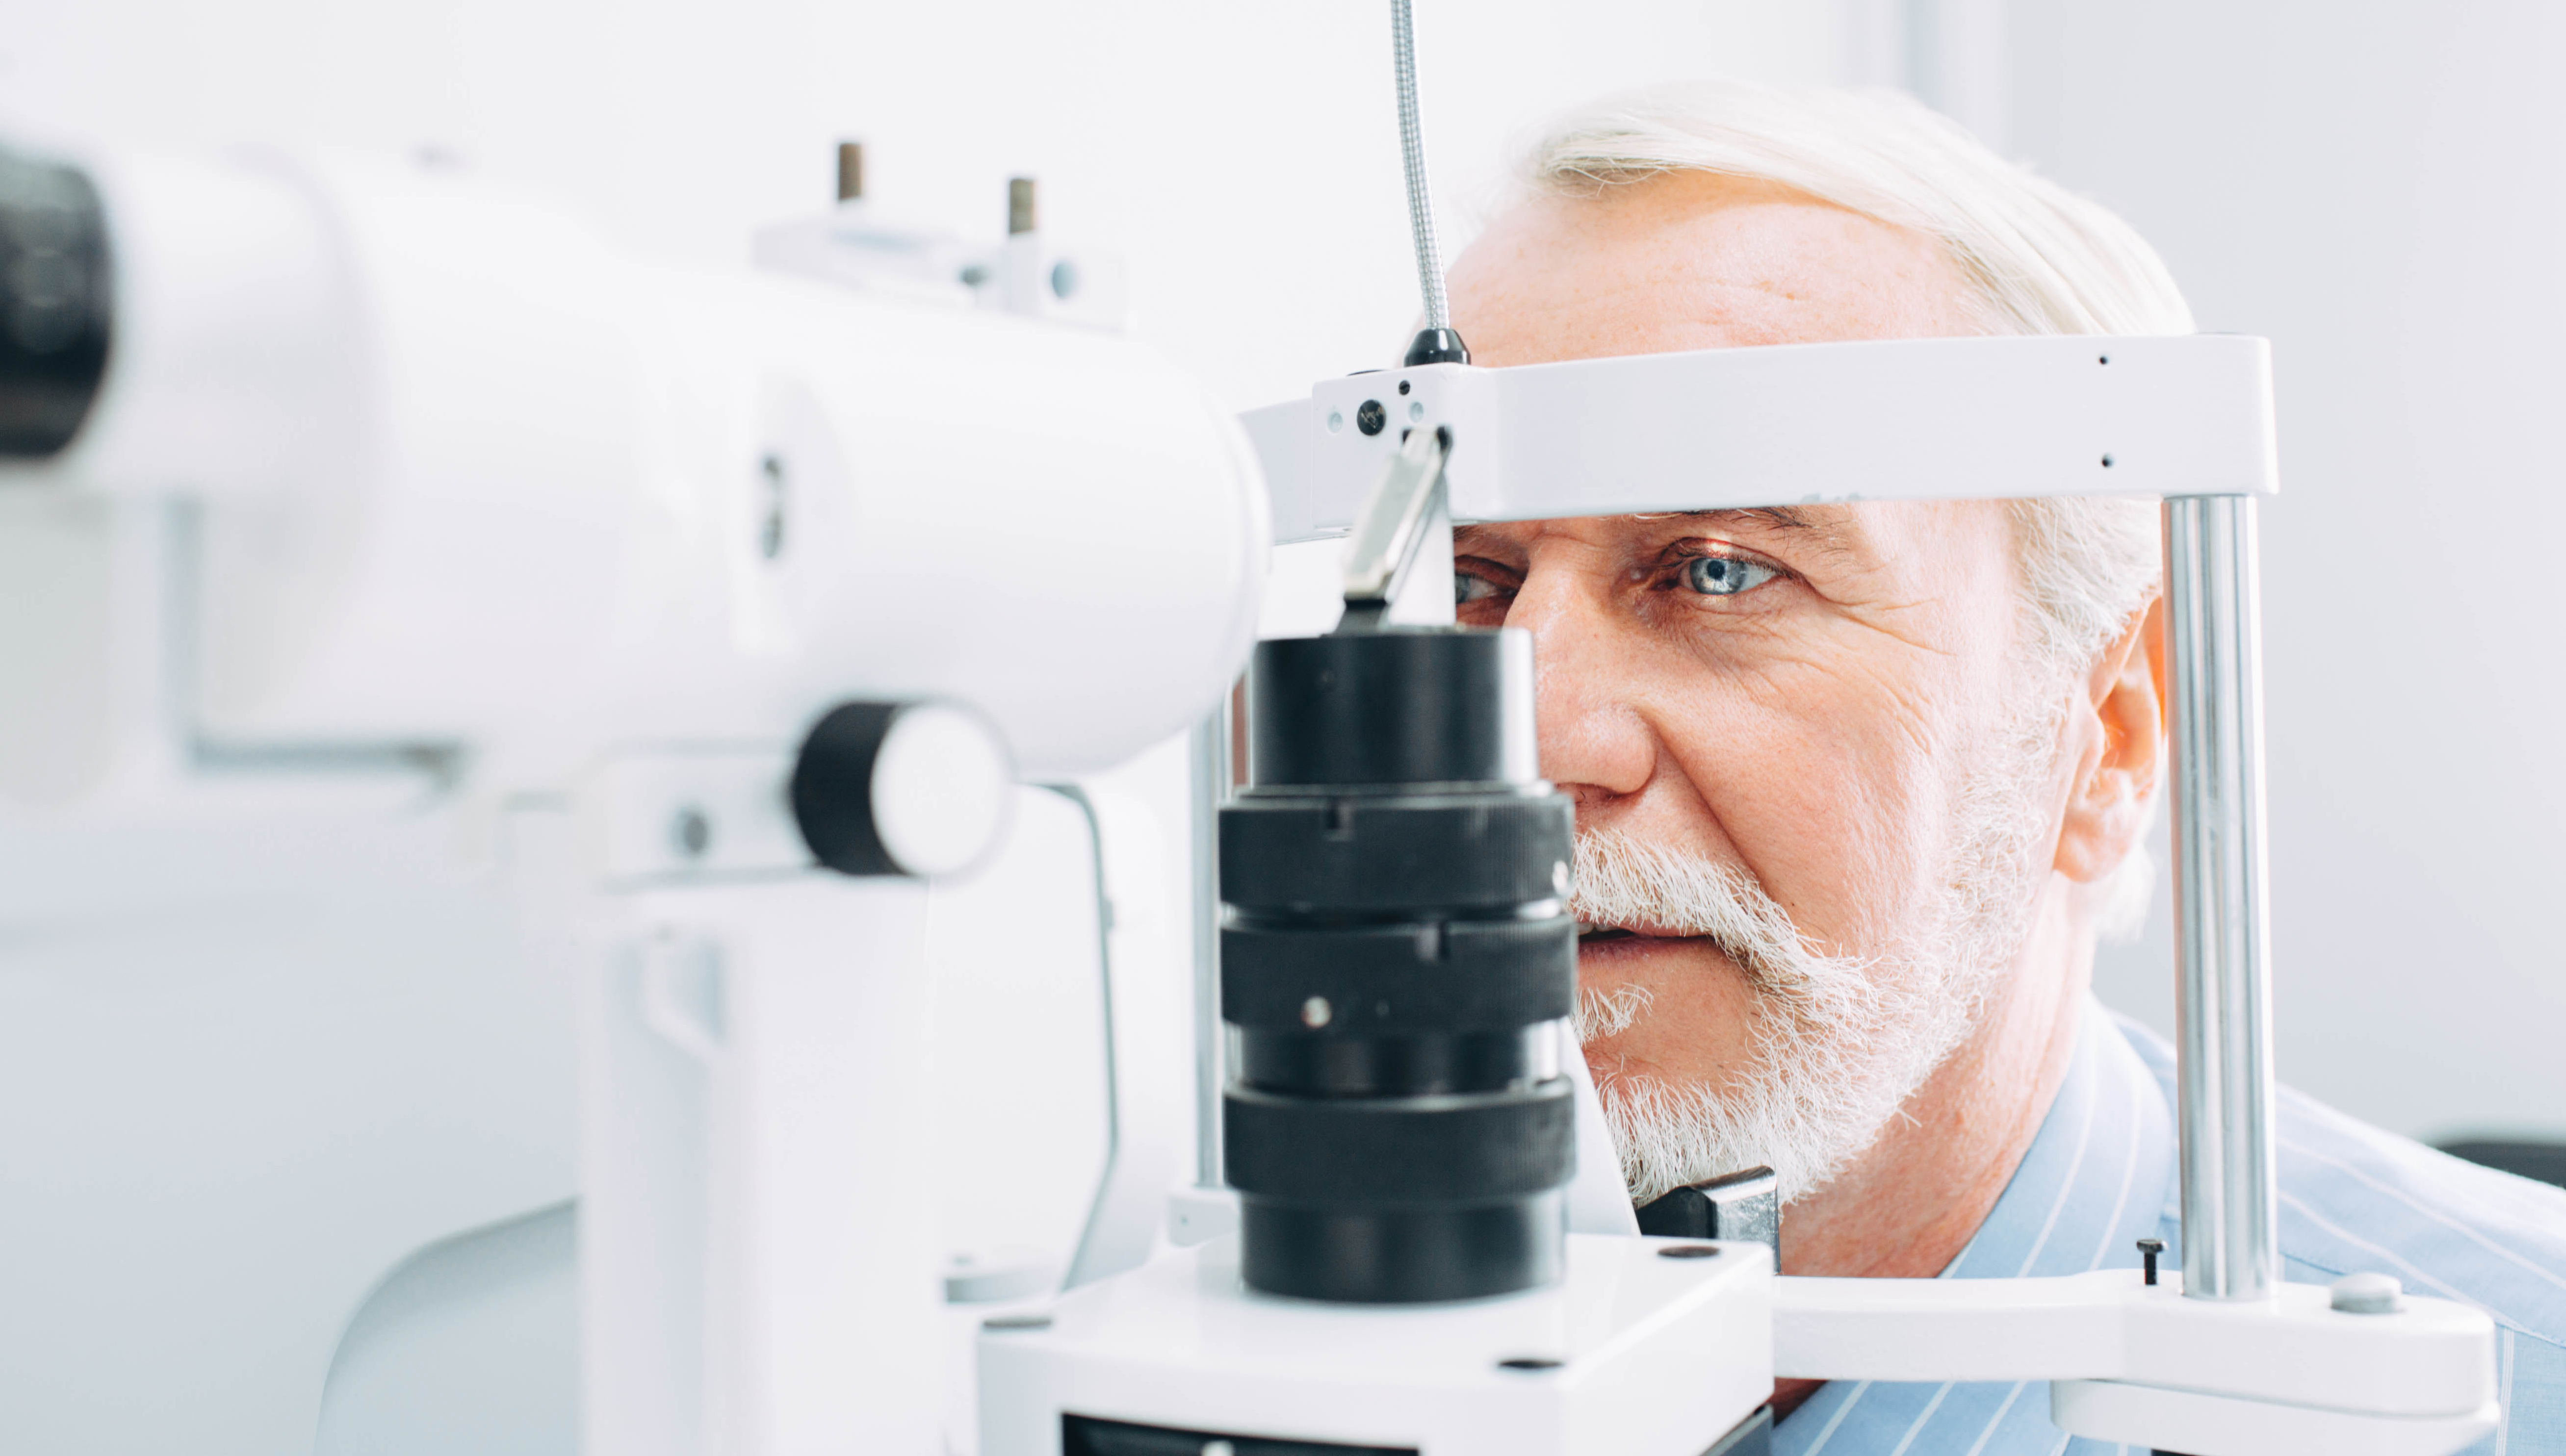 A man with white hair and beard looks into a medical device that shines a light into his eyes